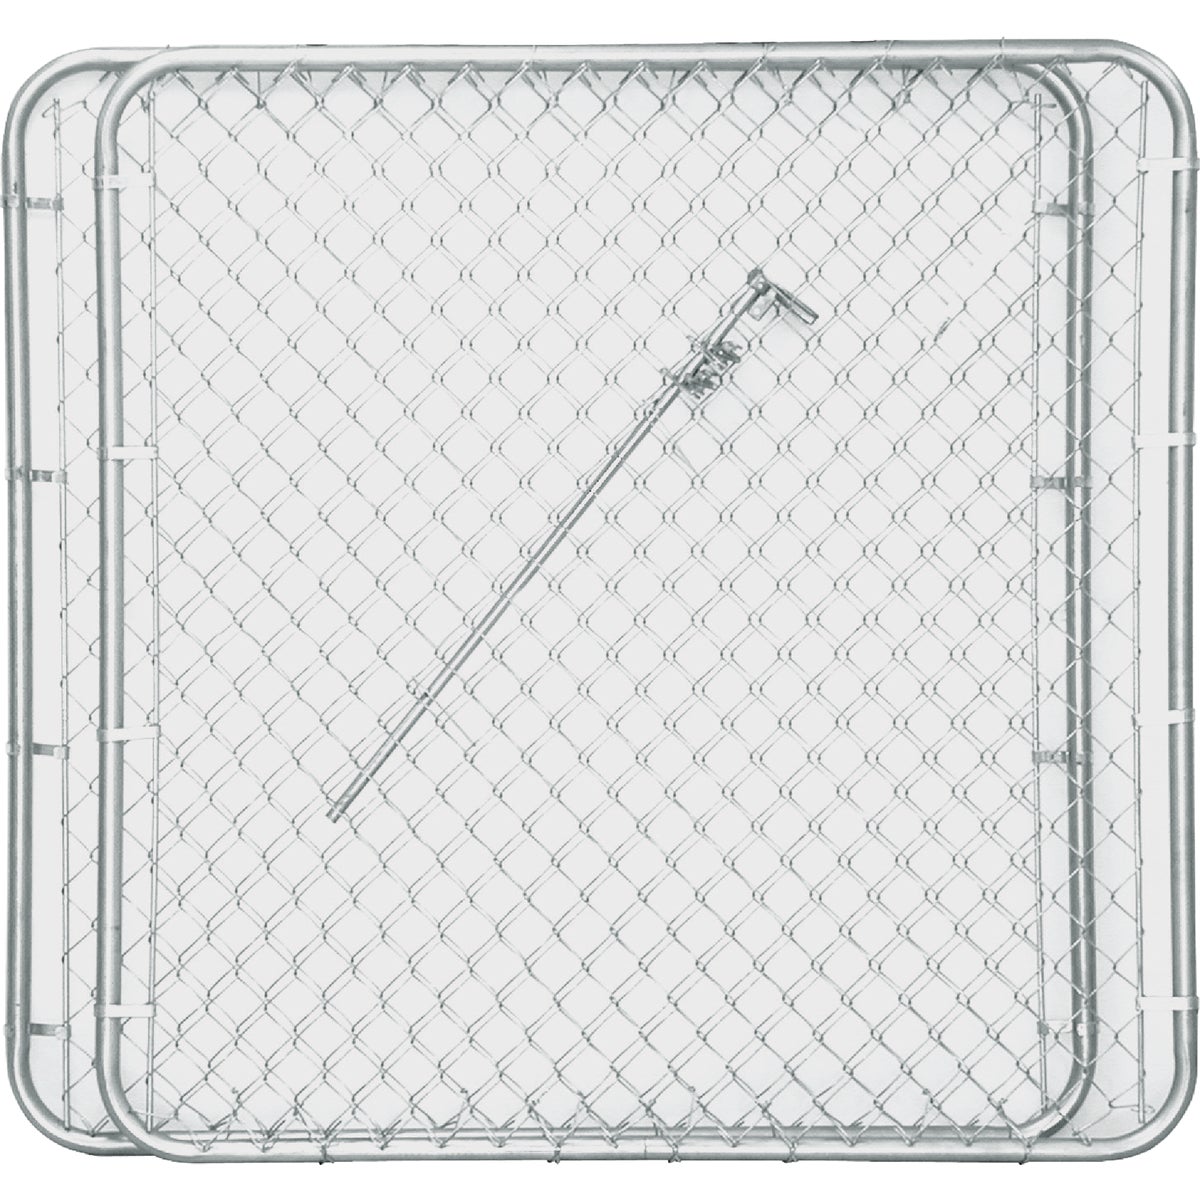 Item 737937, 1-3/8-inch galvanized chain link gate. Consists of 2 panels.